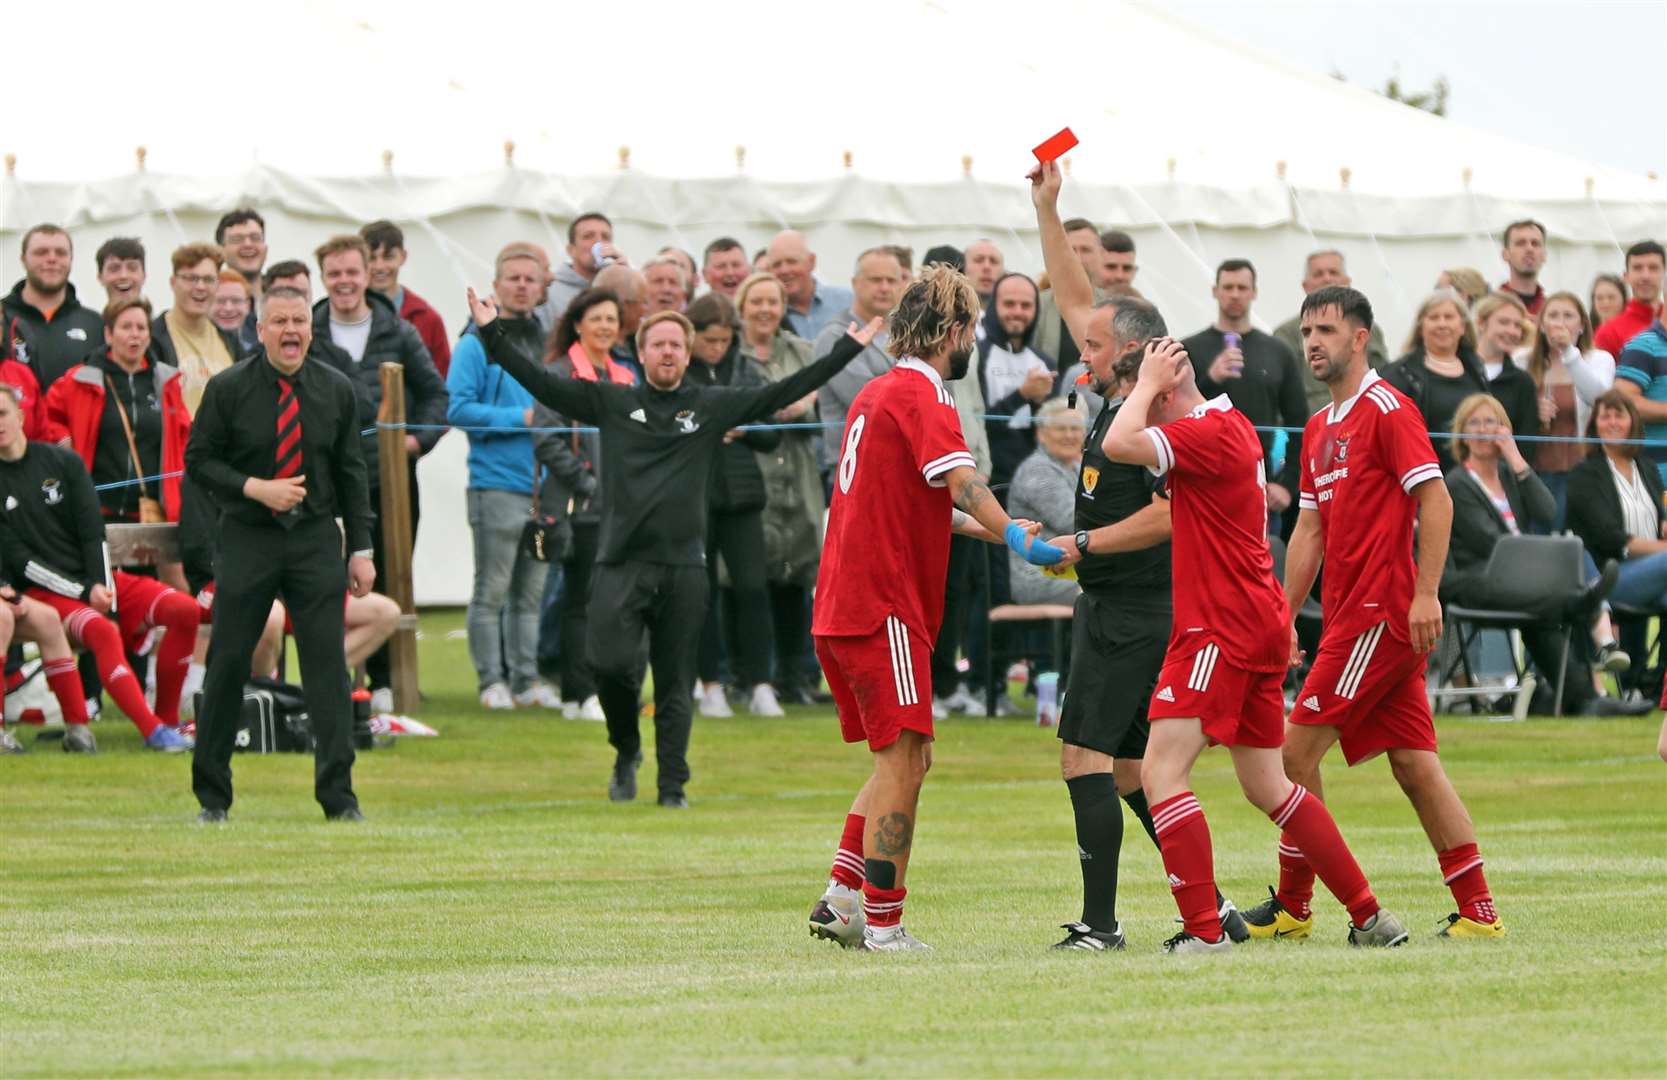 Referee Liam Bremner shows the red card to Grant MacNab of Wick Groats as manager Kevin Anderson protests. Picture: James Gunn